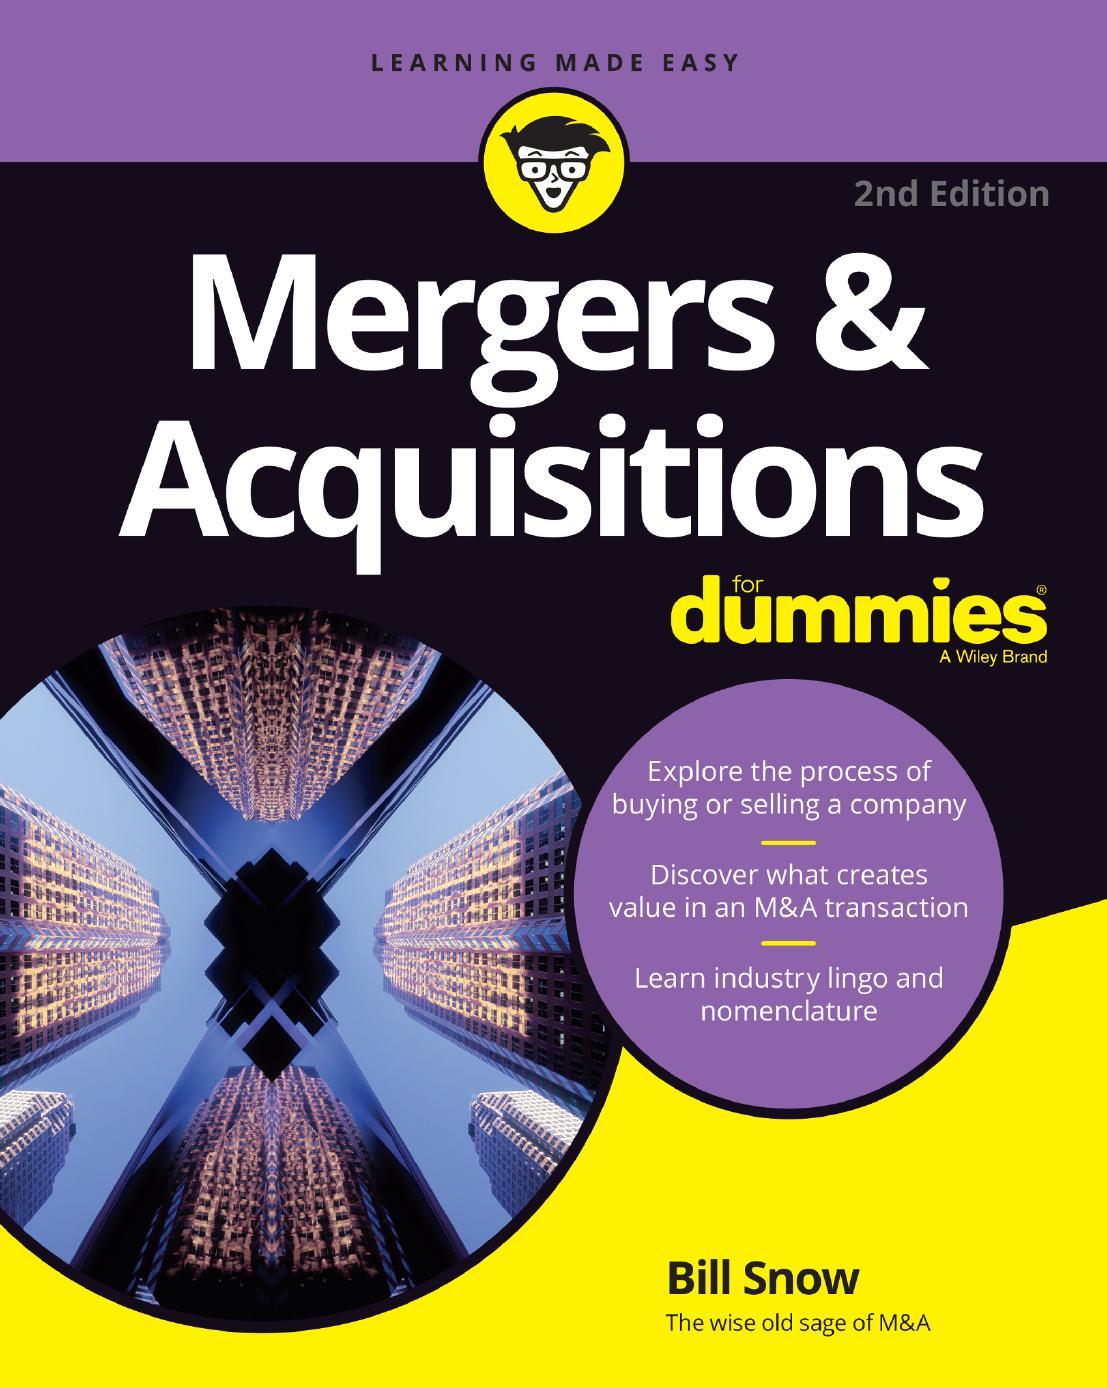 Mergers & Acquisitions For Dummies by Bill R. Snow